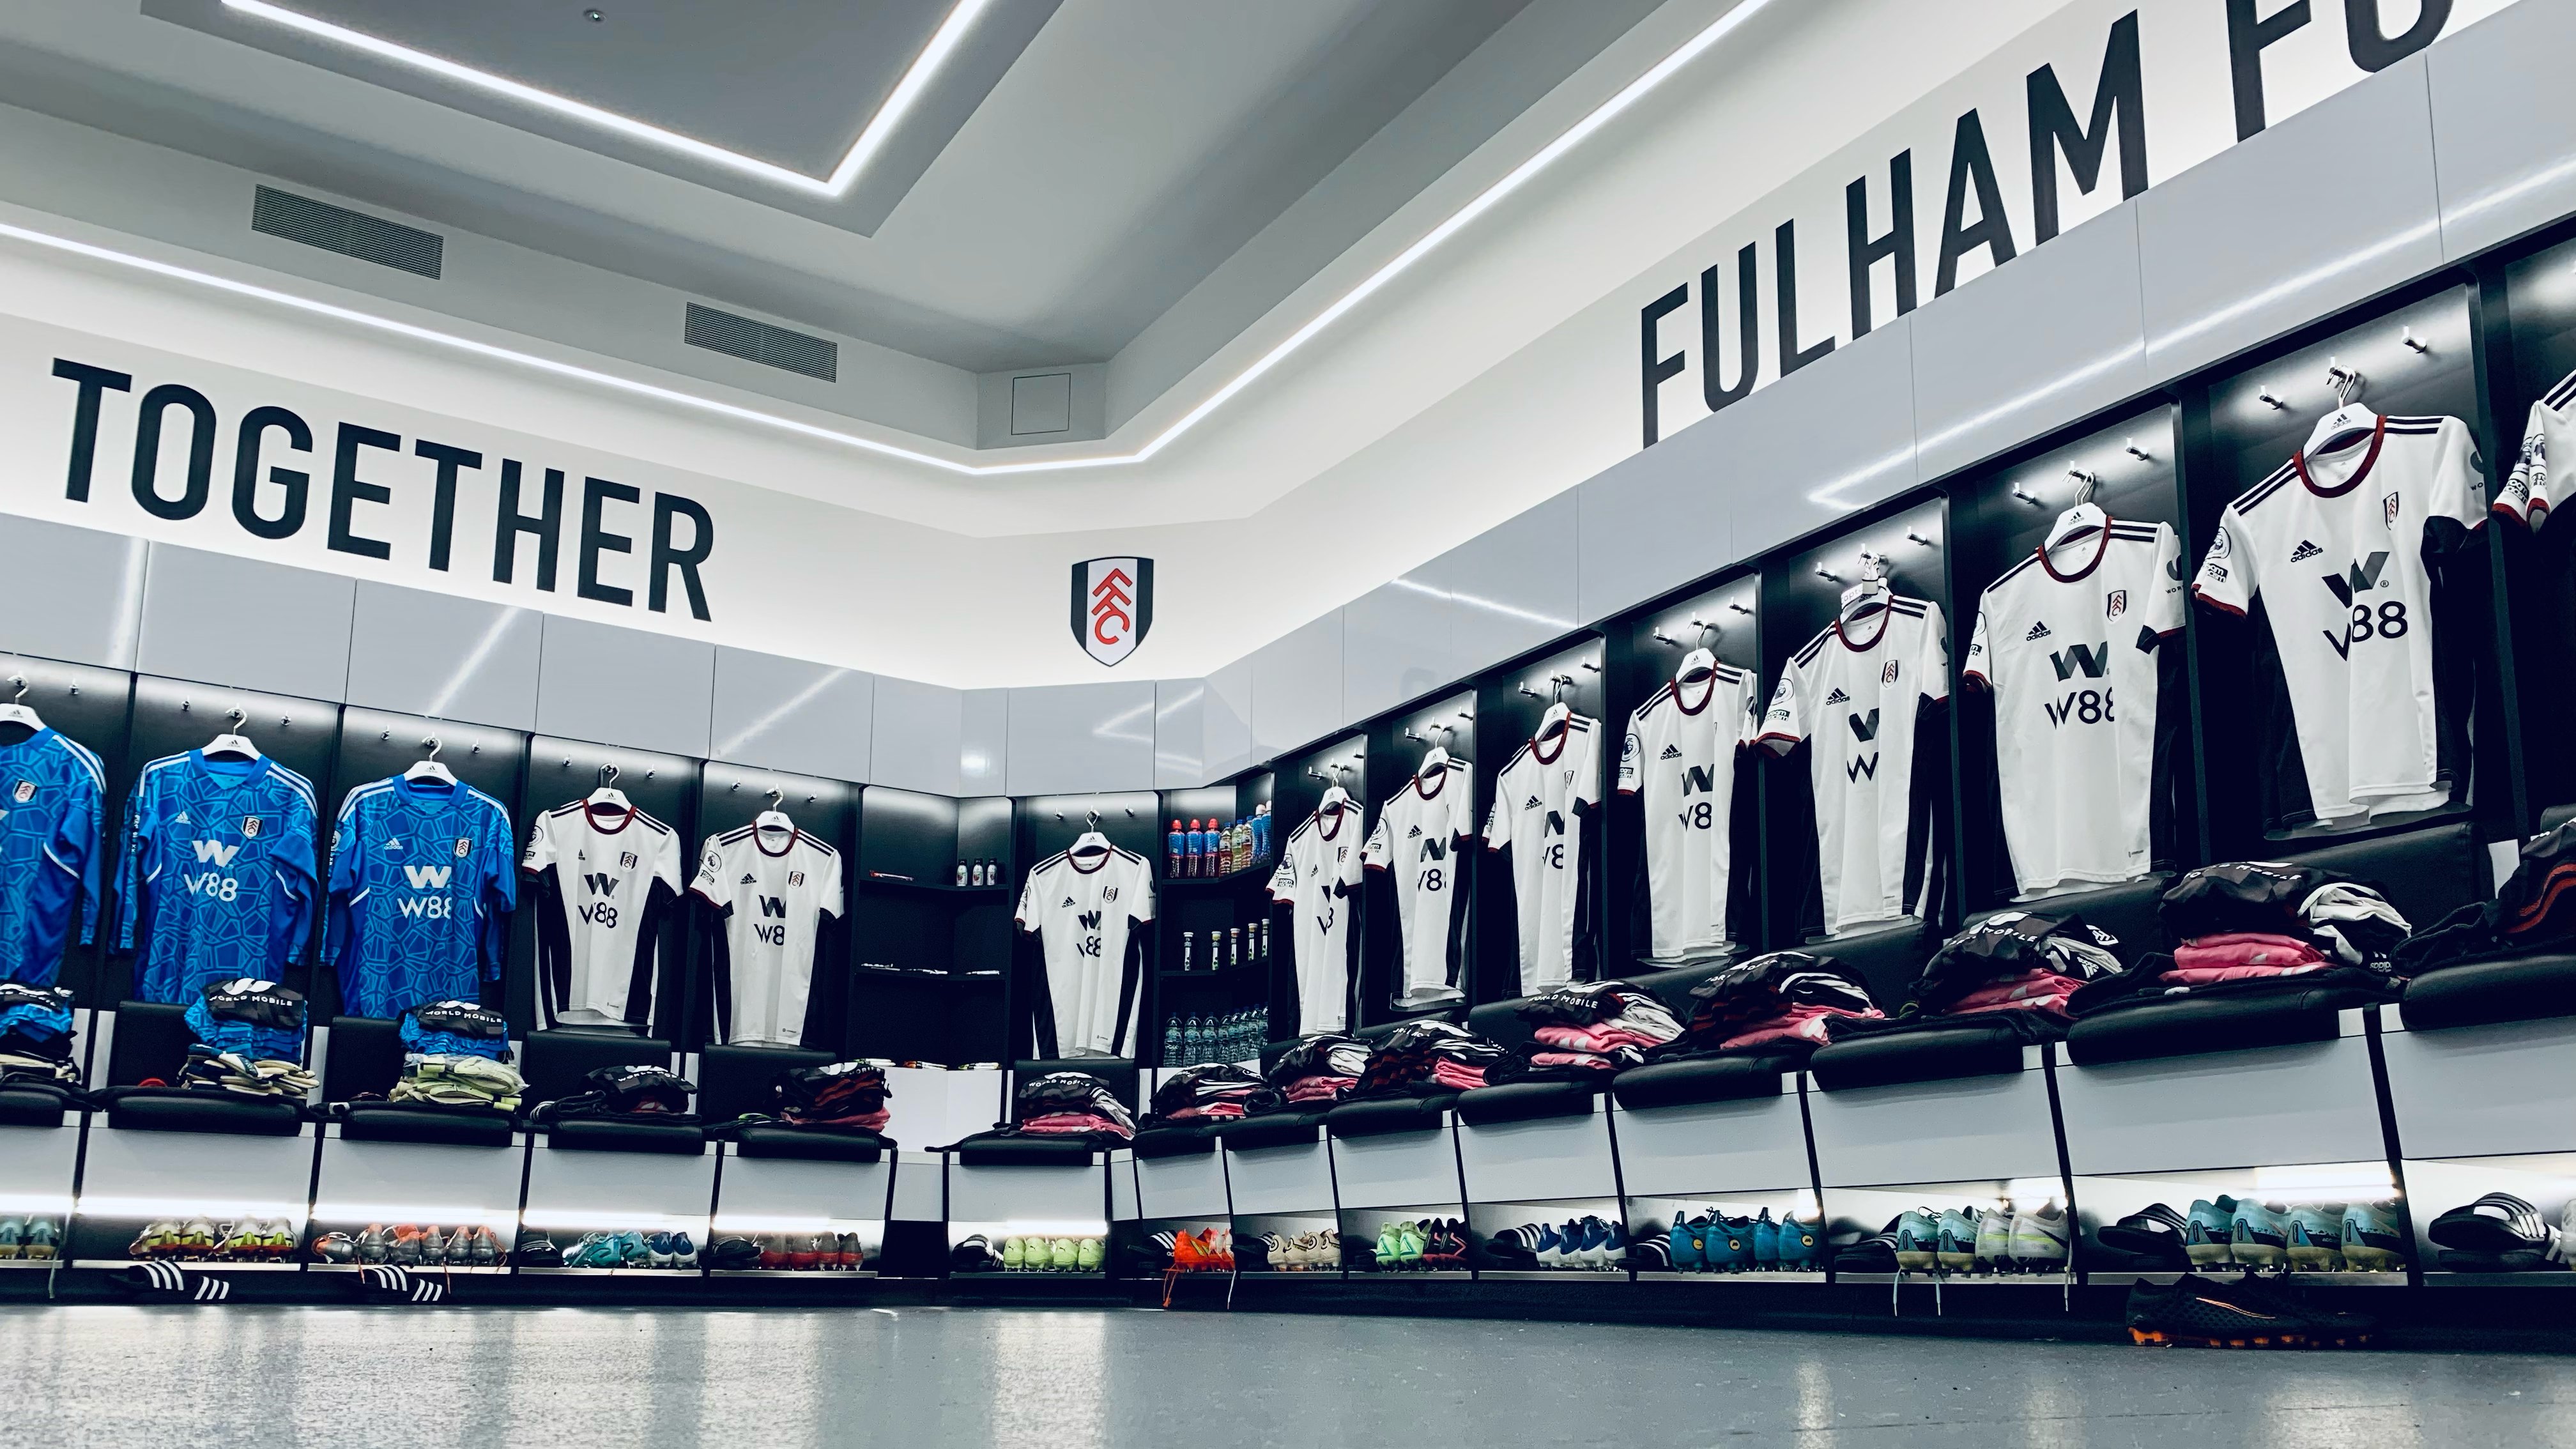 The Fulham changing room pre-match, with 'Together' branding above the hanging shirts.